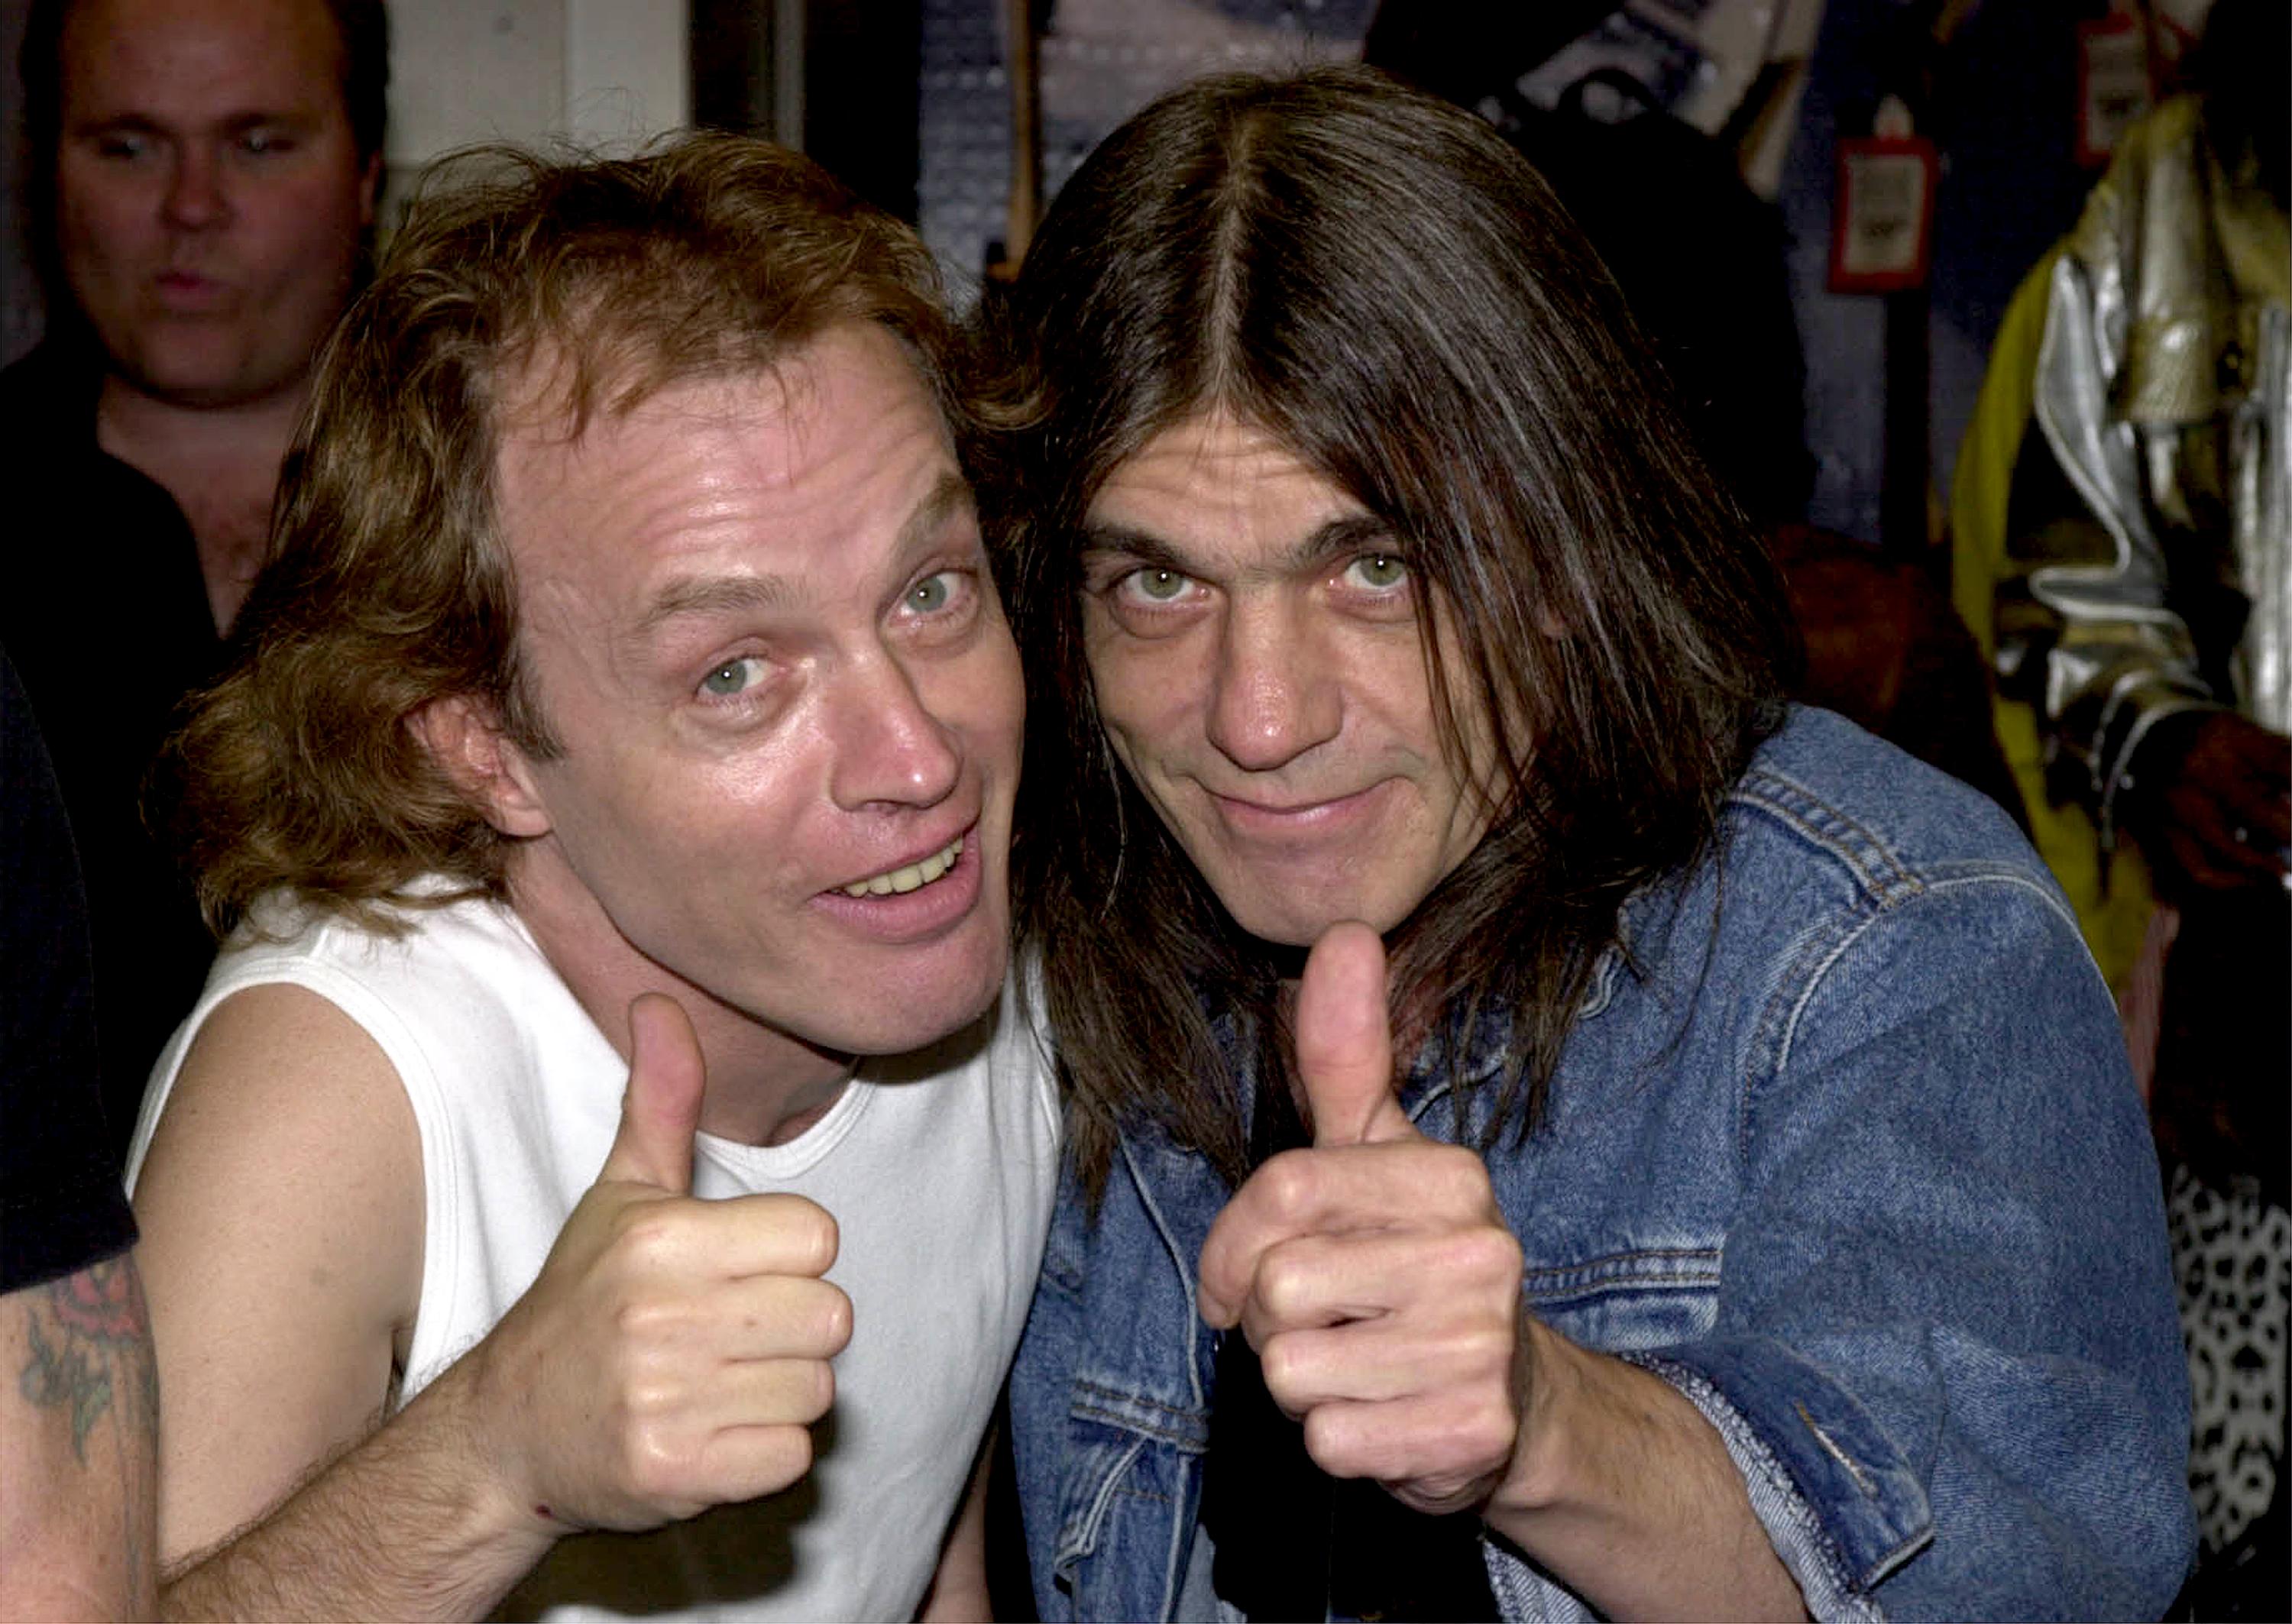 AC/DC's Malcolm Young leaving band